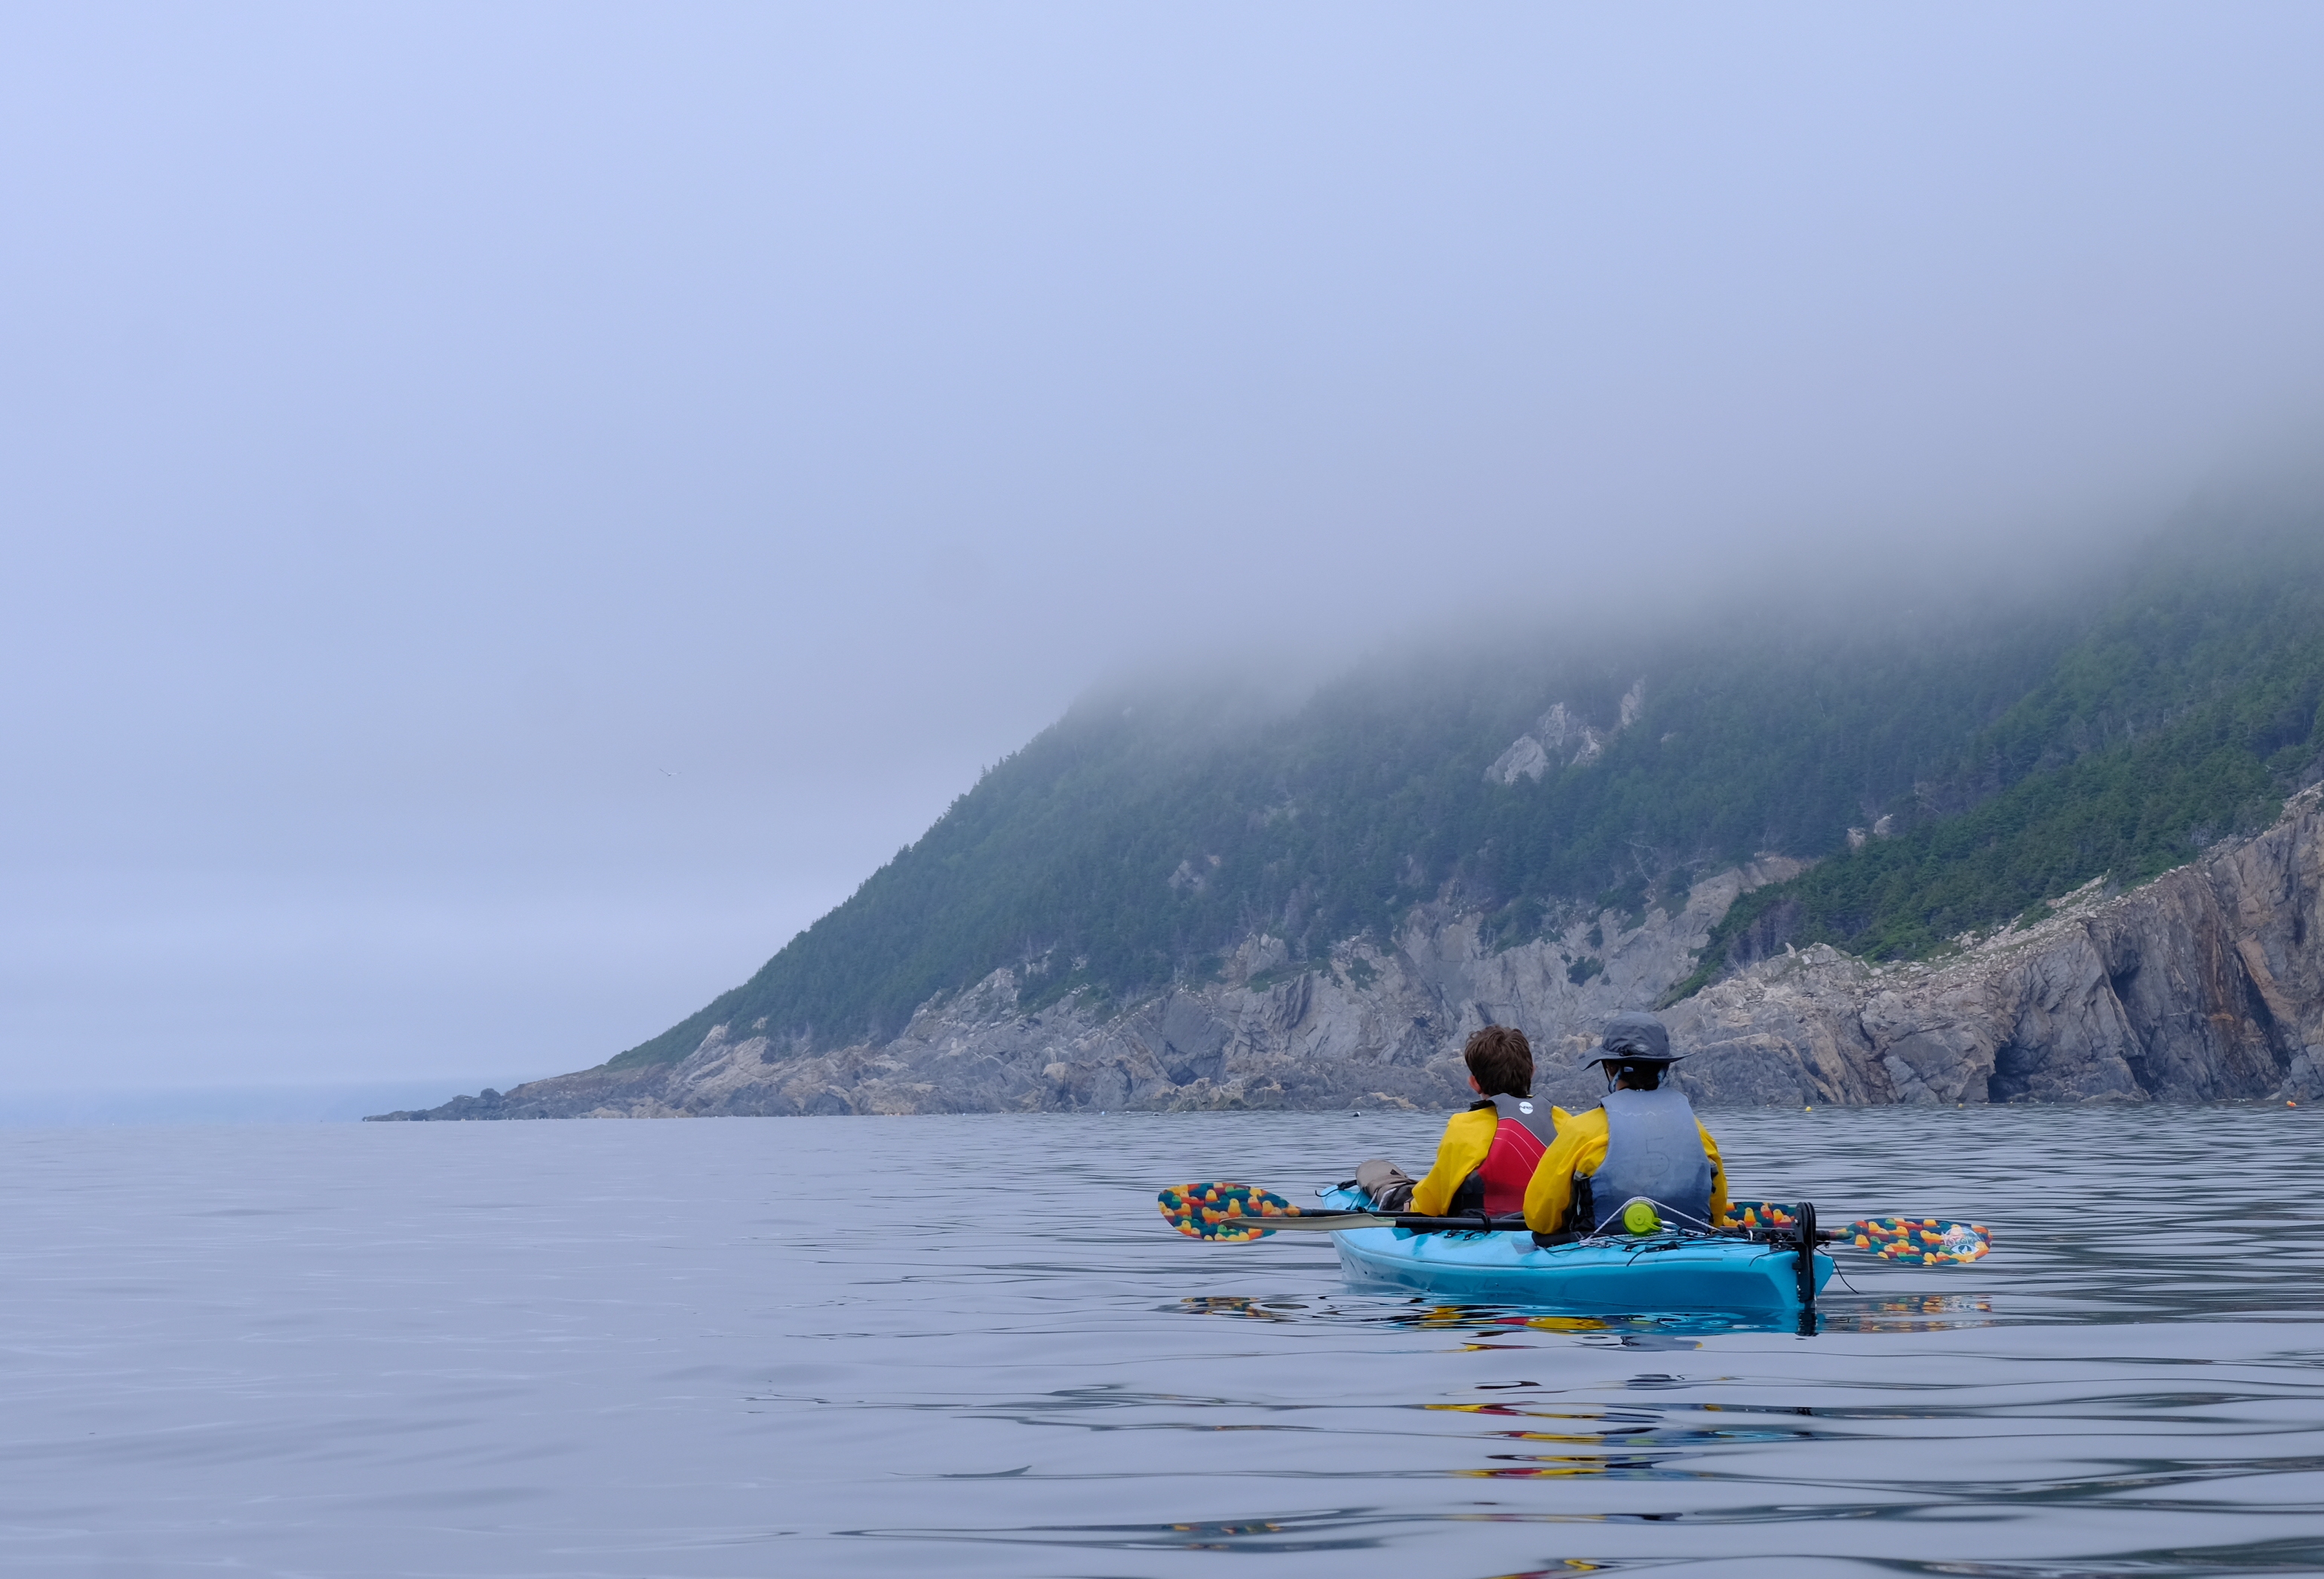 On Misty Isles: A Lake Champlain Kayak Expedition